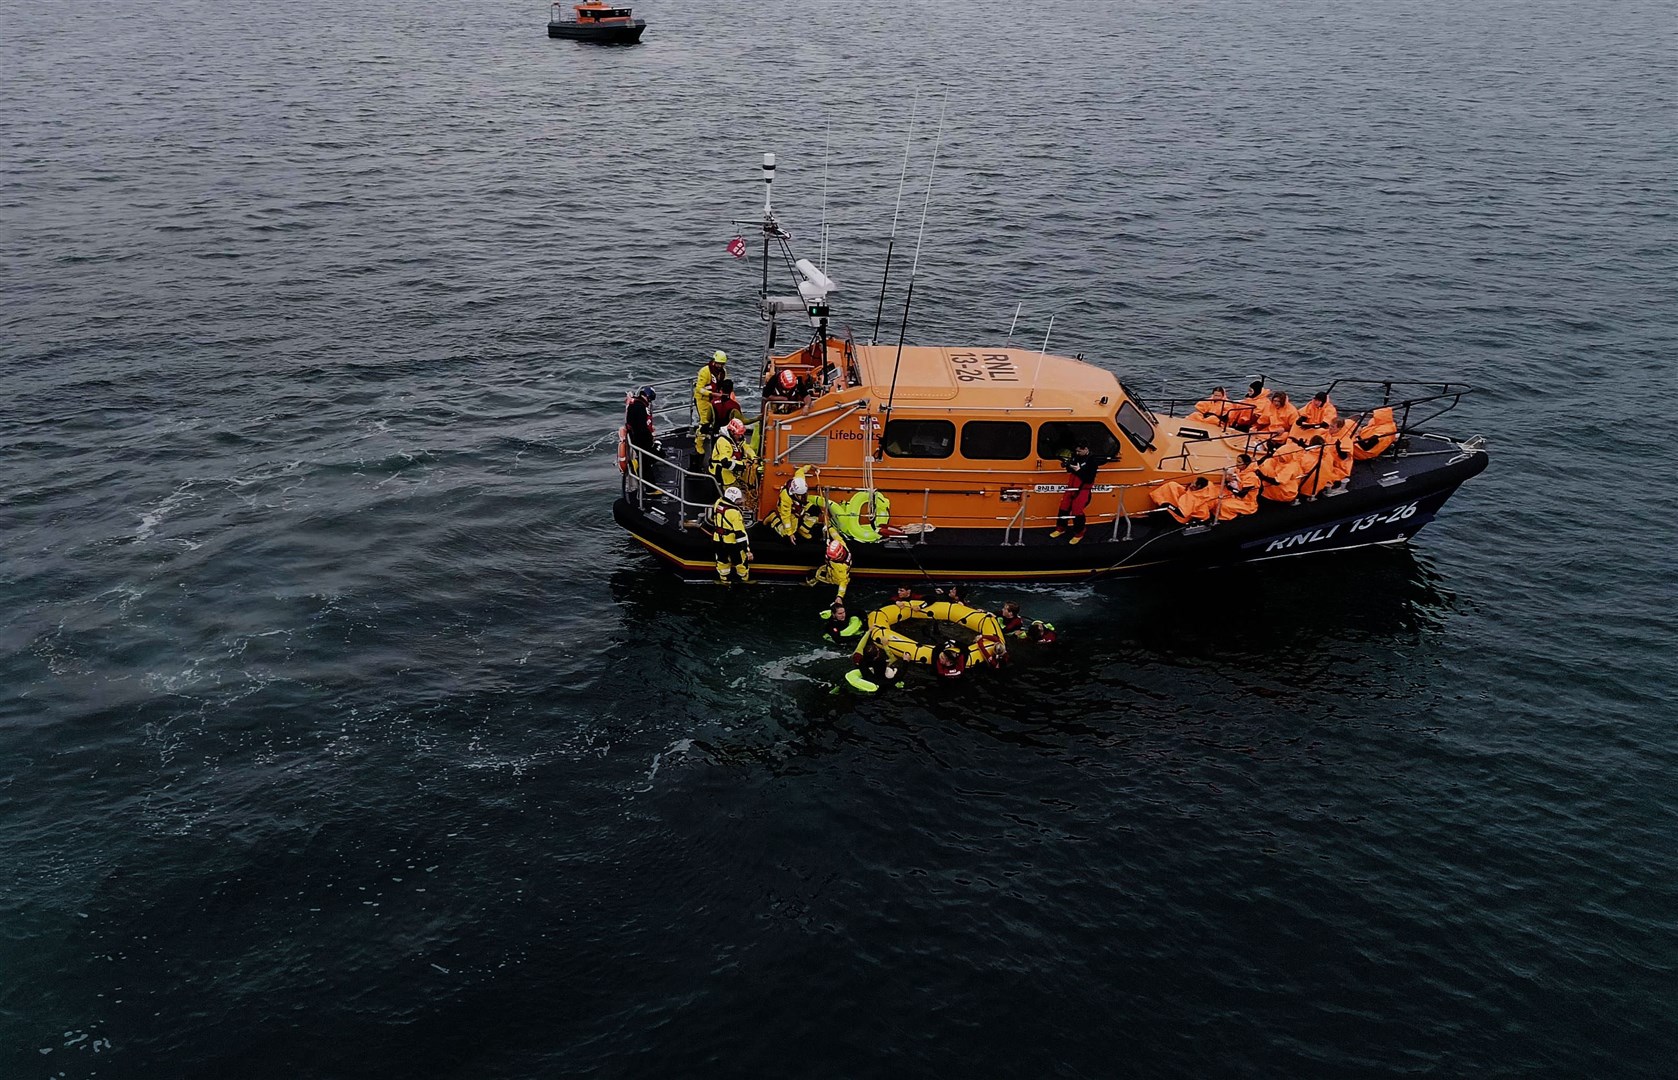 A recent rescue, by Dover RNLI’s lifeboat crew, of migrants crossing the English Channel (RNLI/PA)